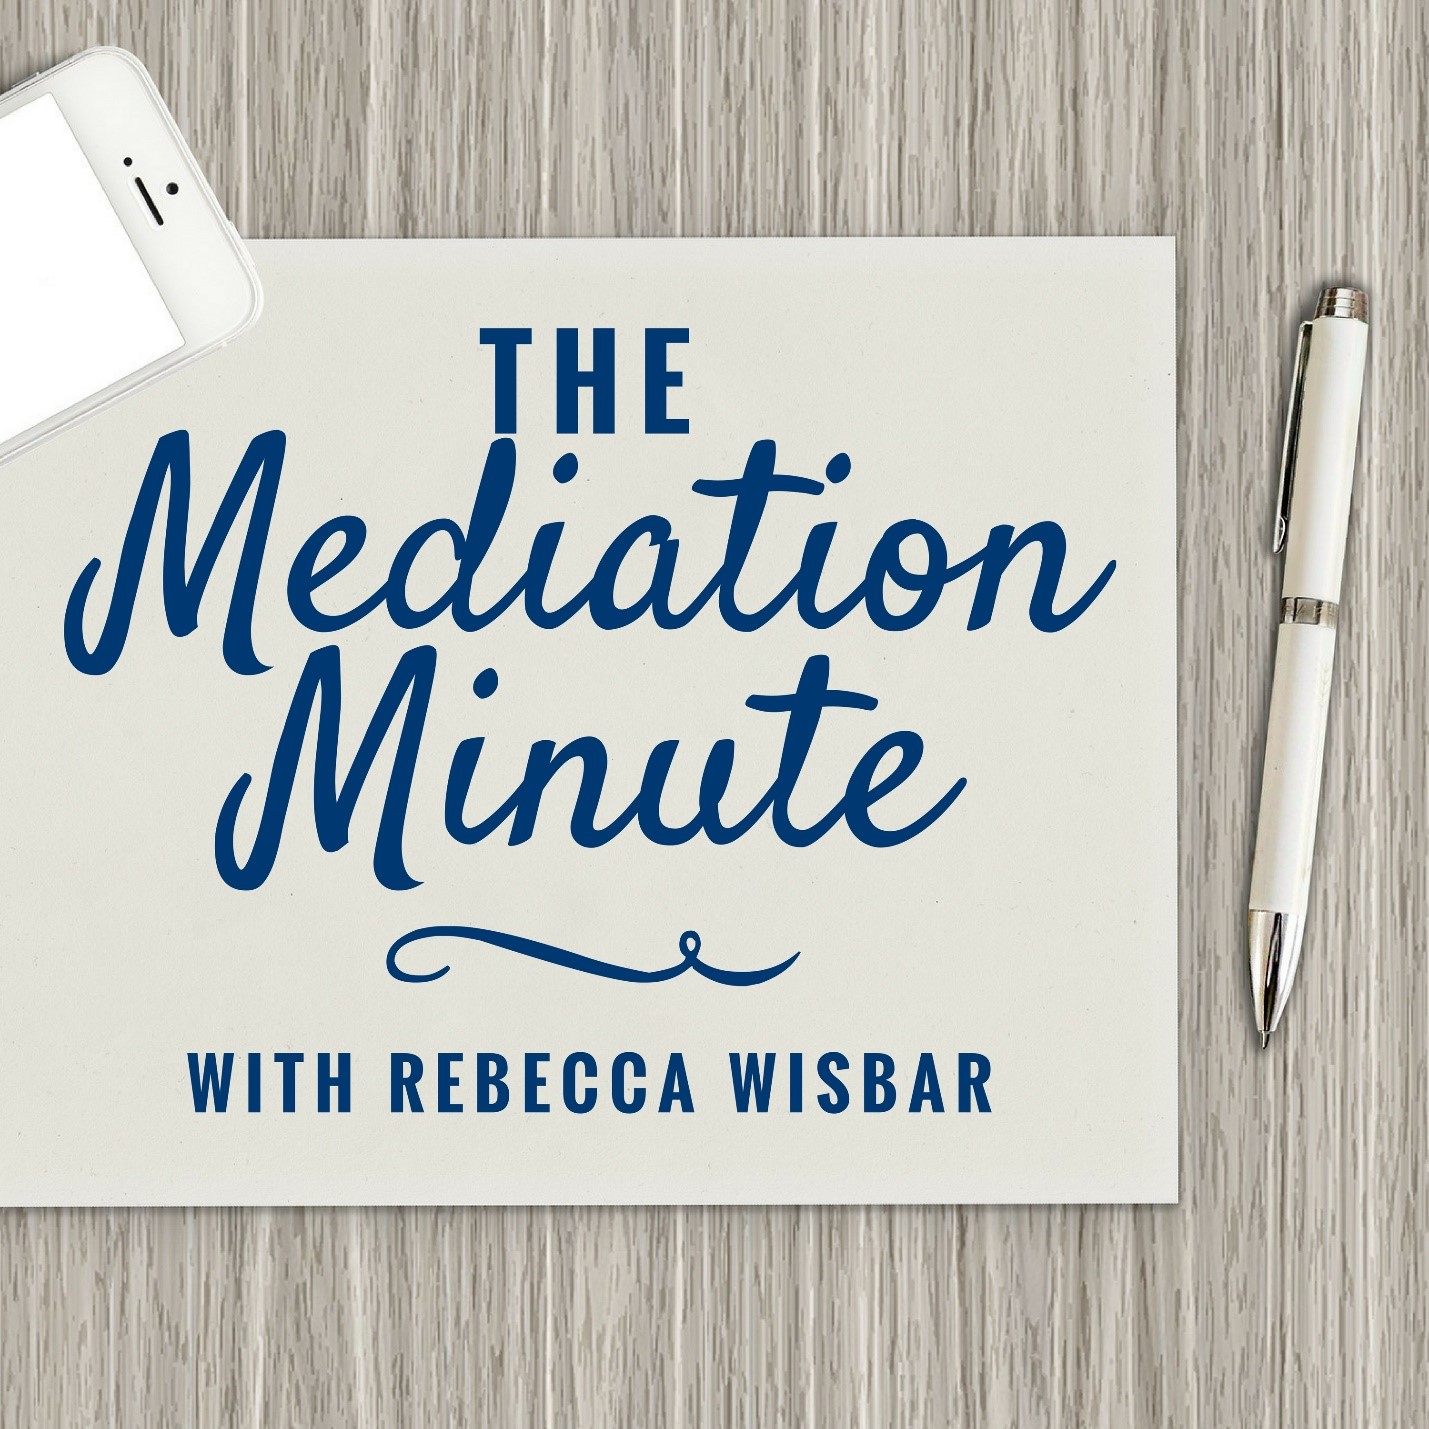 The Mediation Minute with Rebecca Wisbar